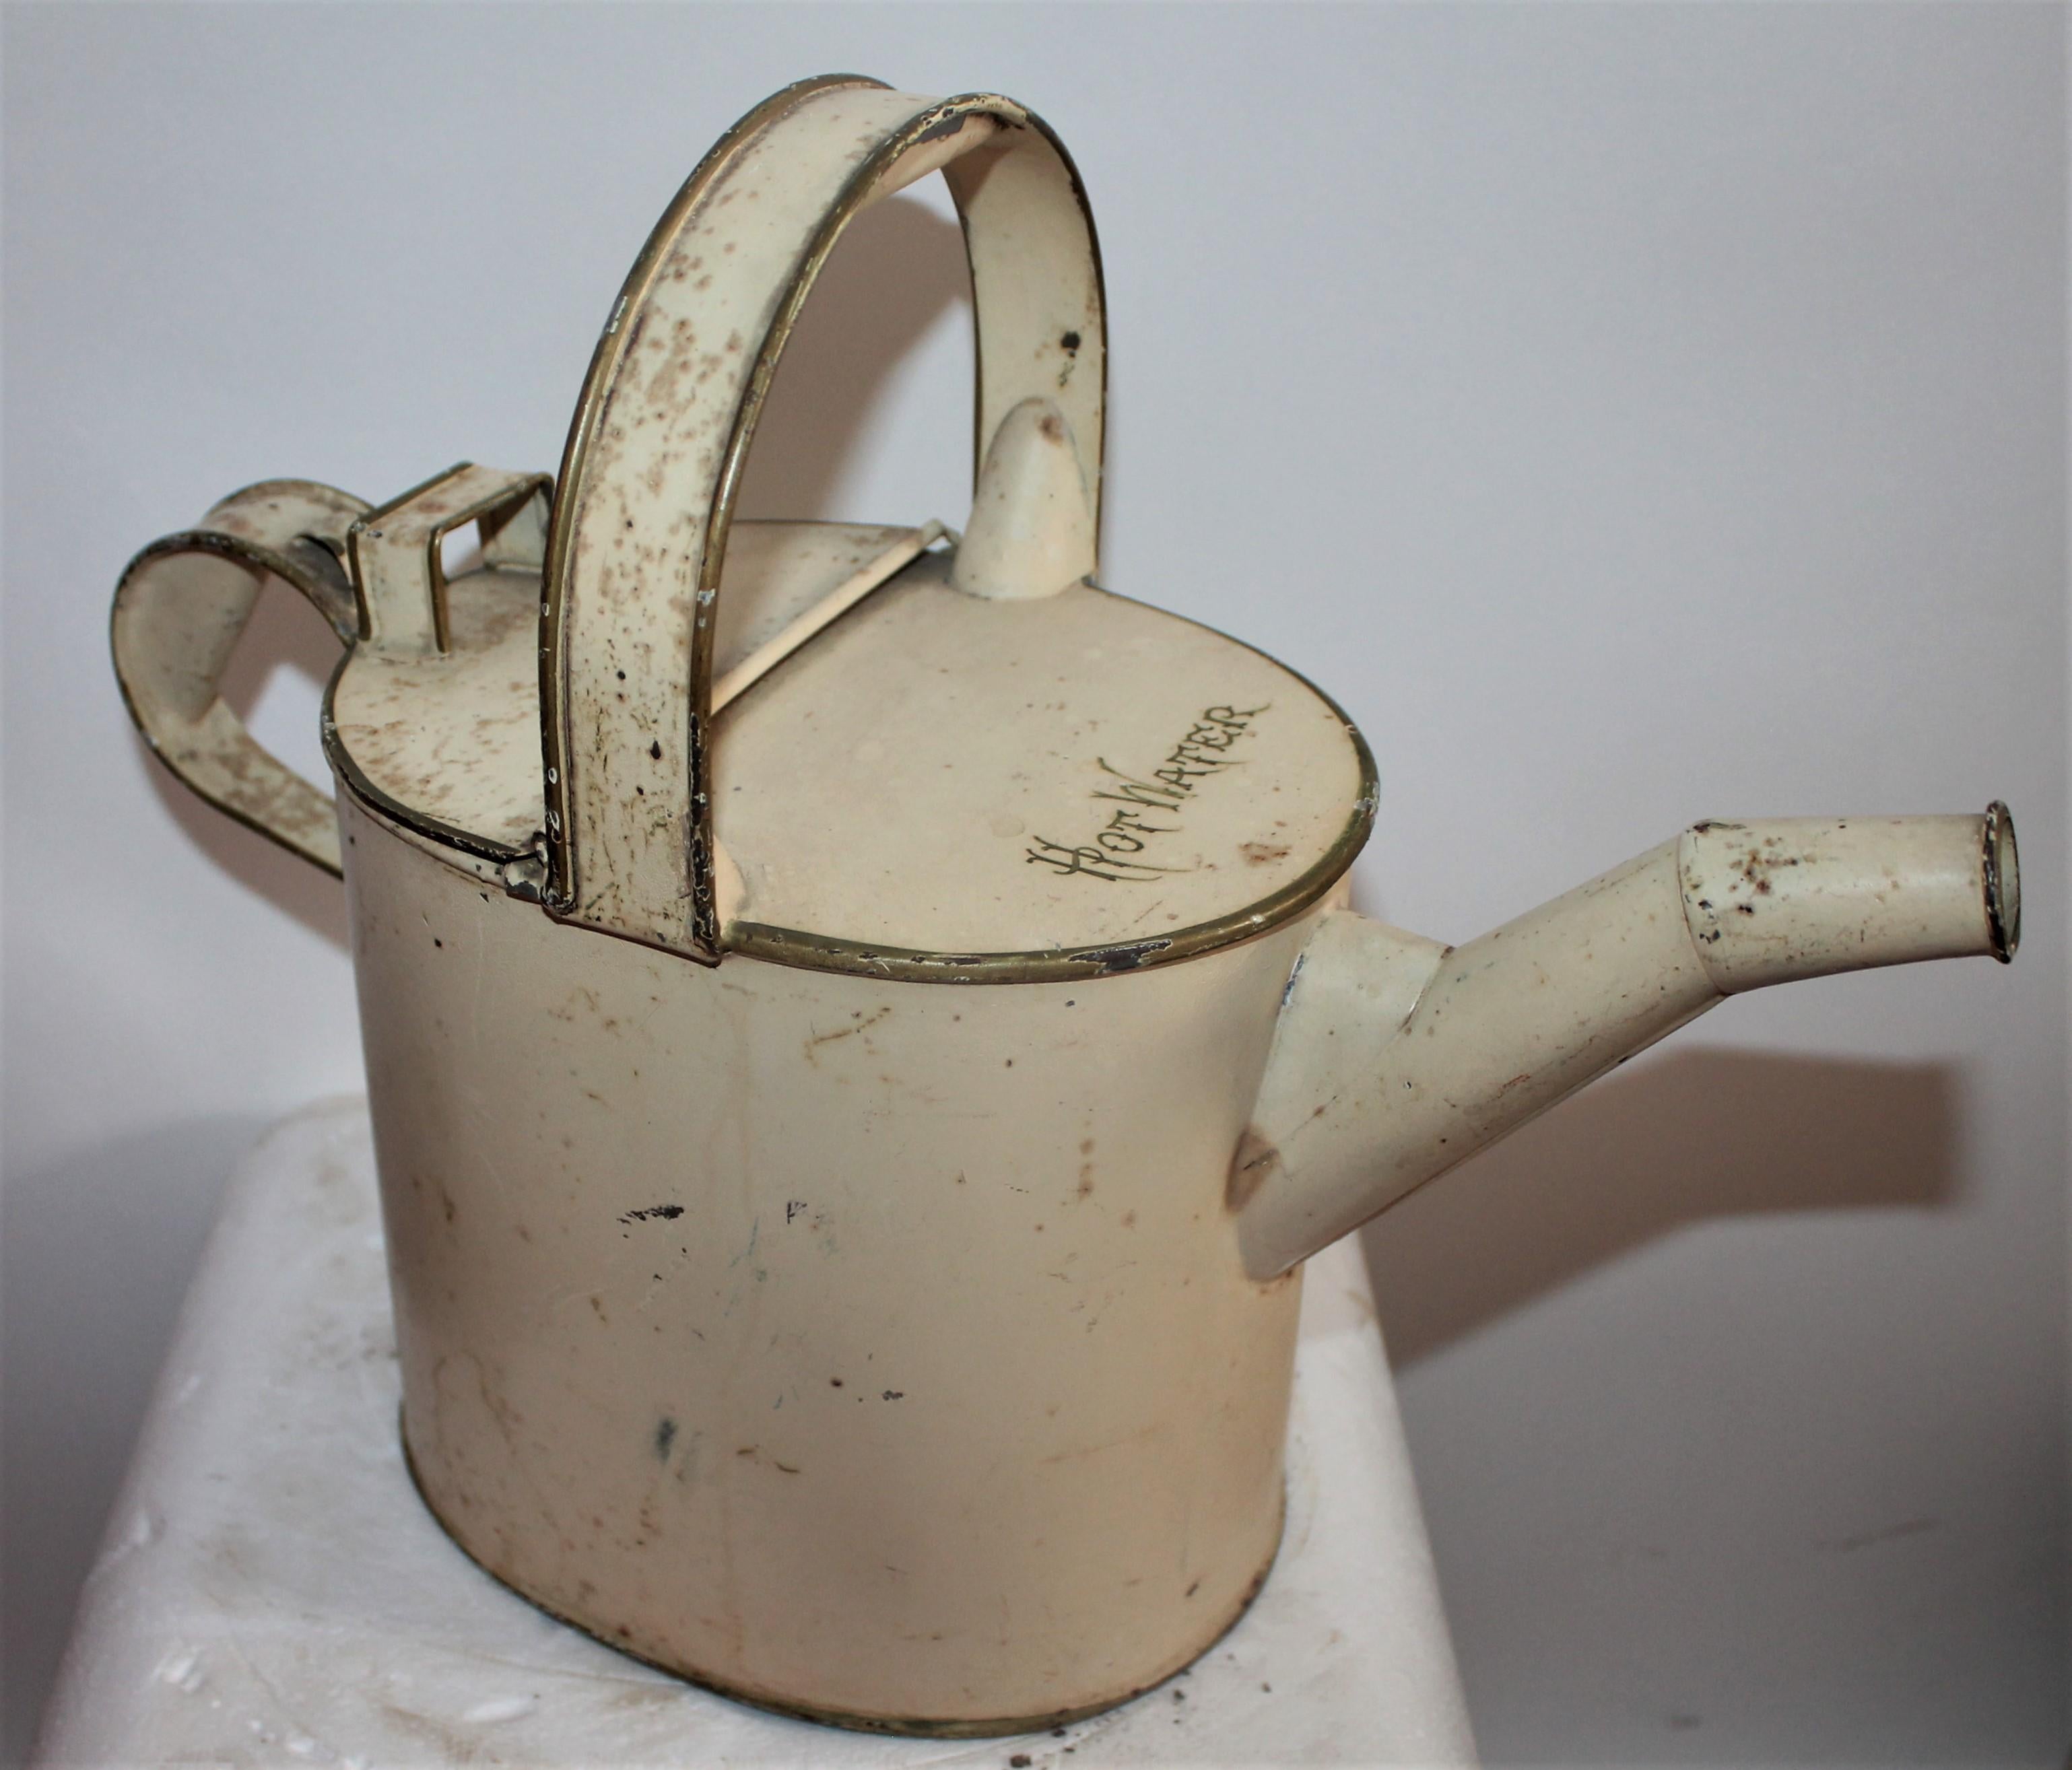 19th century hot water canister in original cream or oyster painted surface. The top of the canister it reads ”HOT WATER